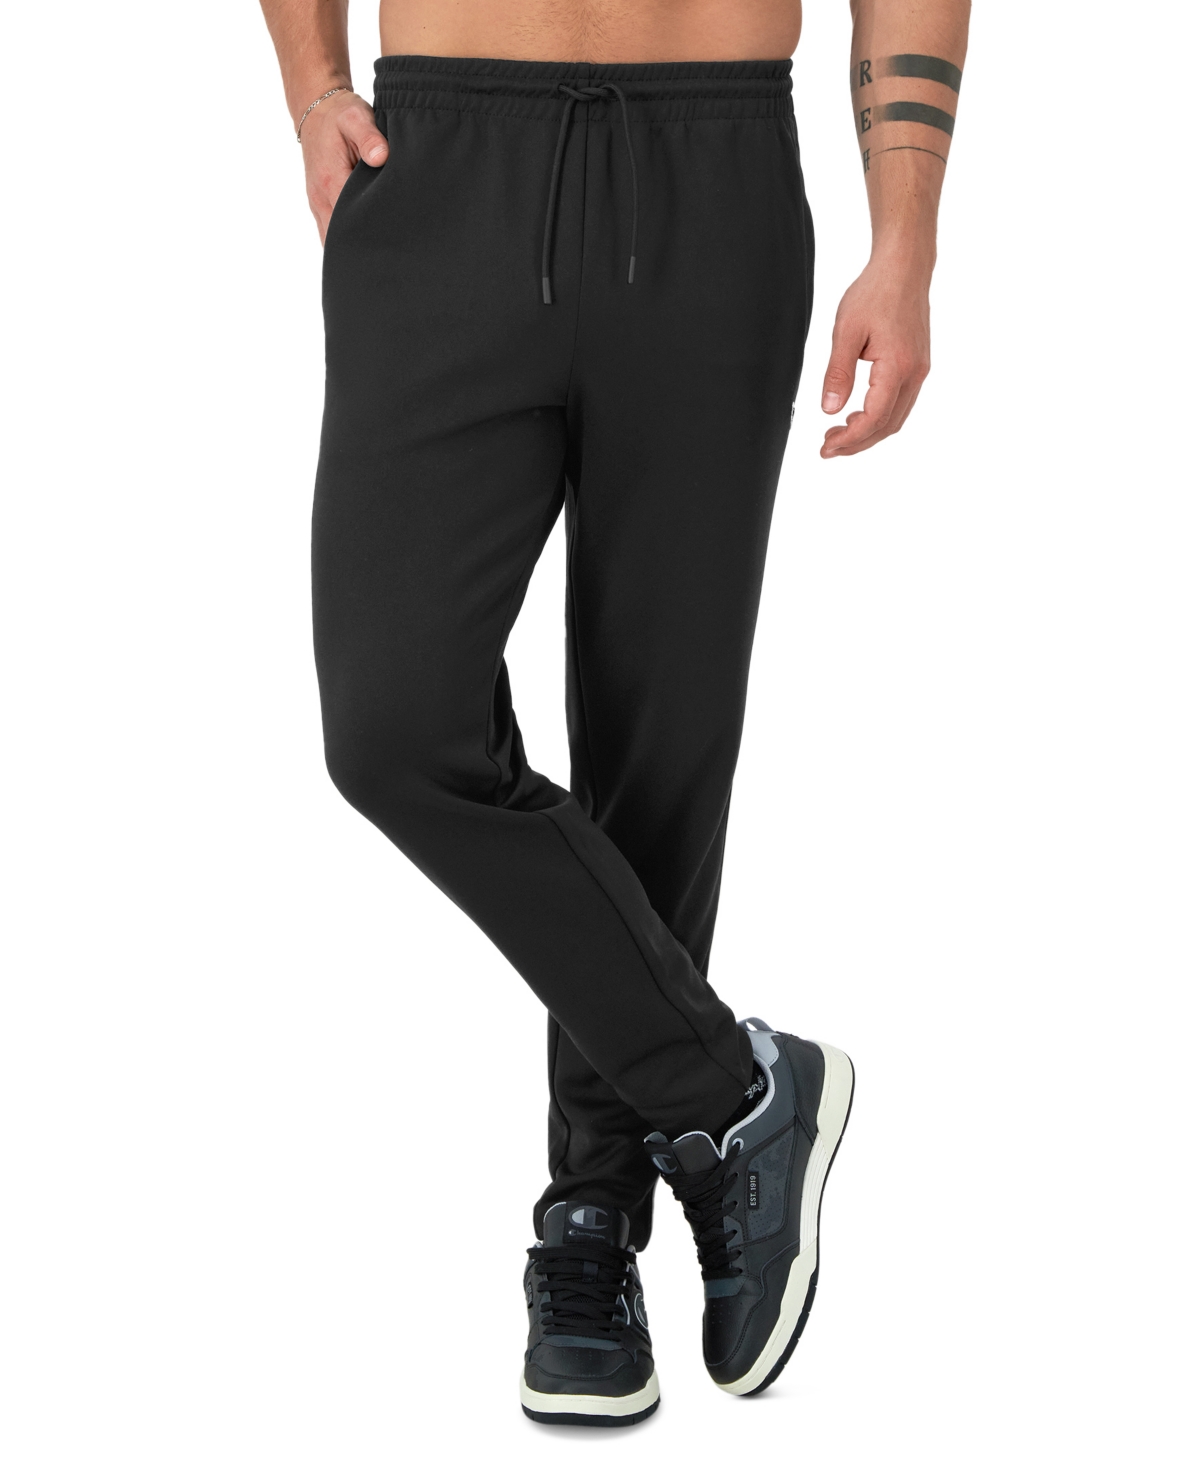 Men's Slim-Fit Piped Tricot Track Pants - Black